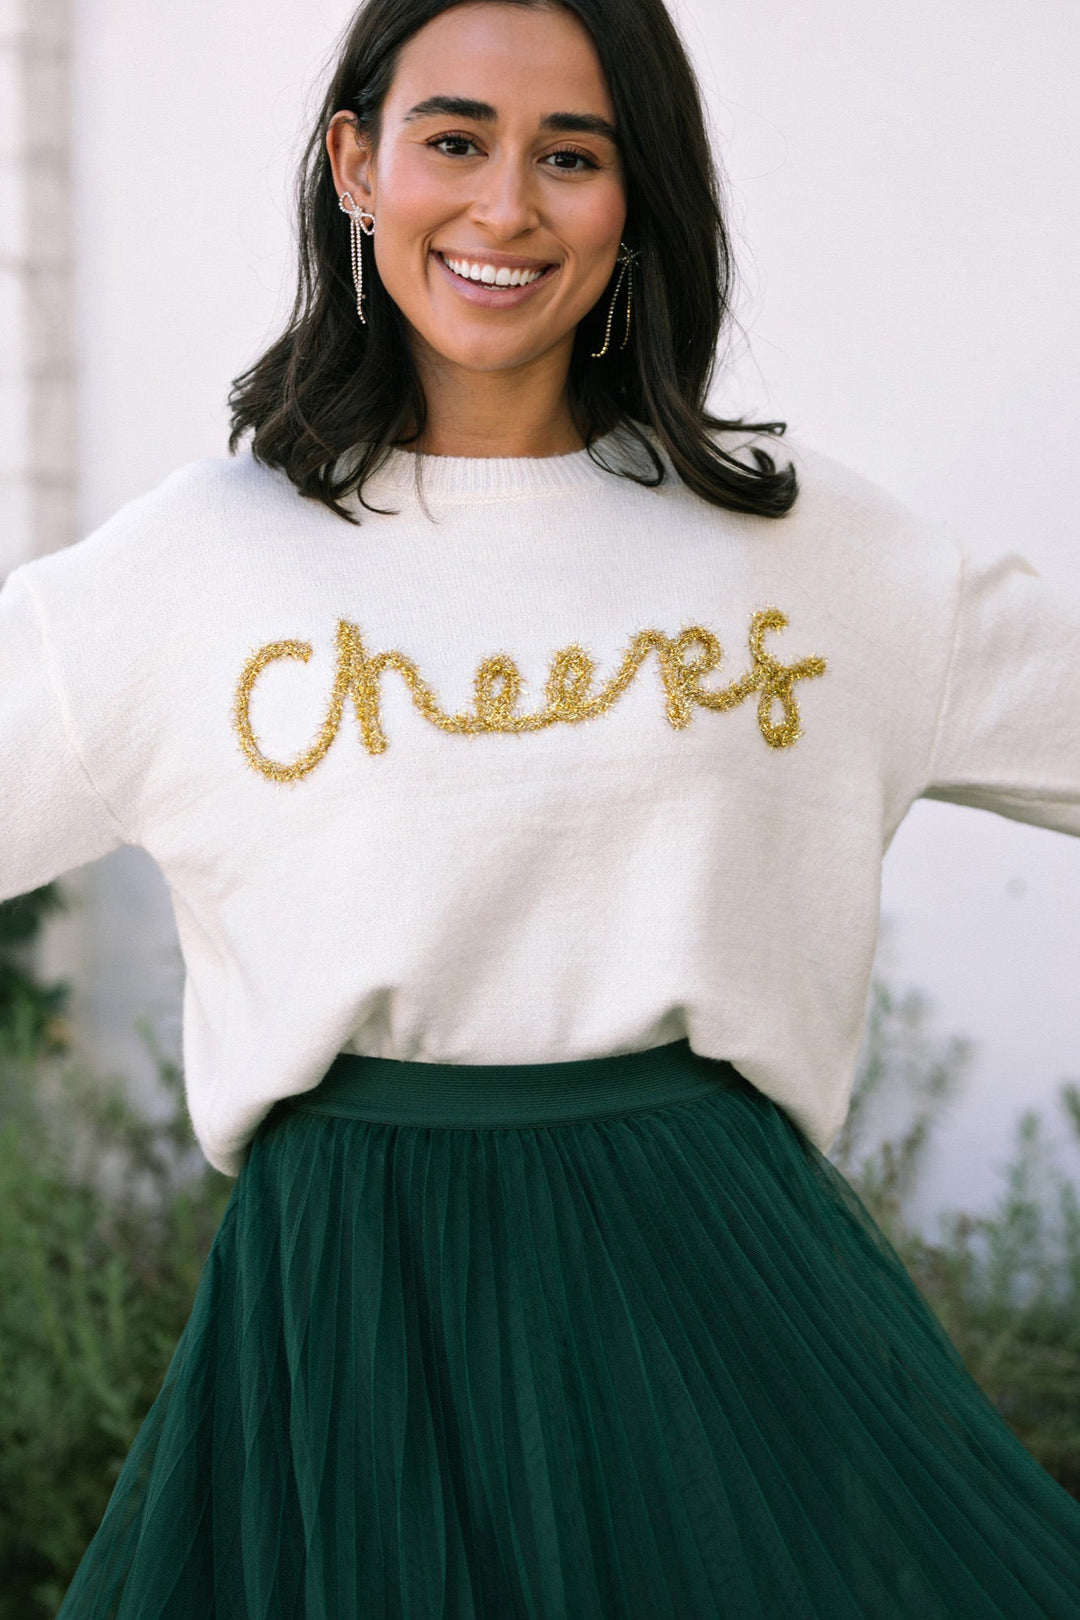 Candice Cheers Knit Sweater